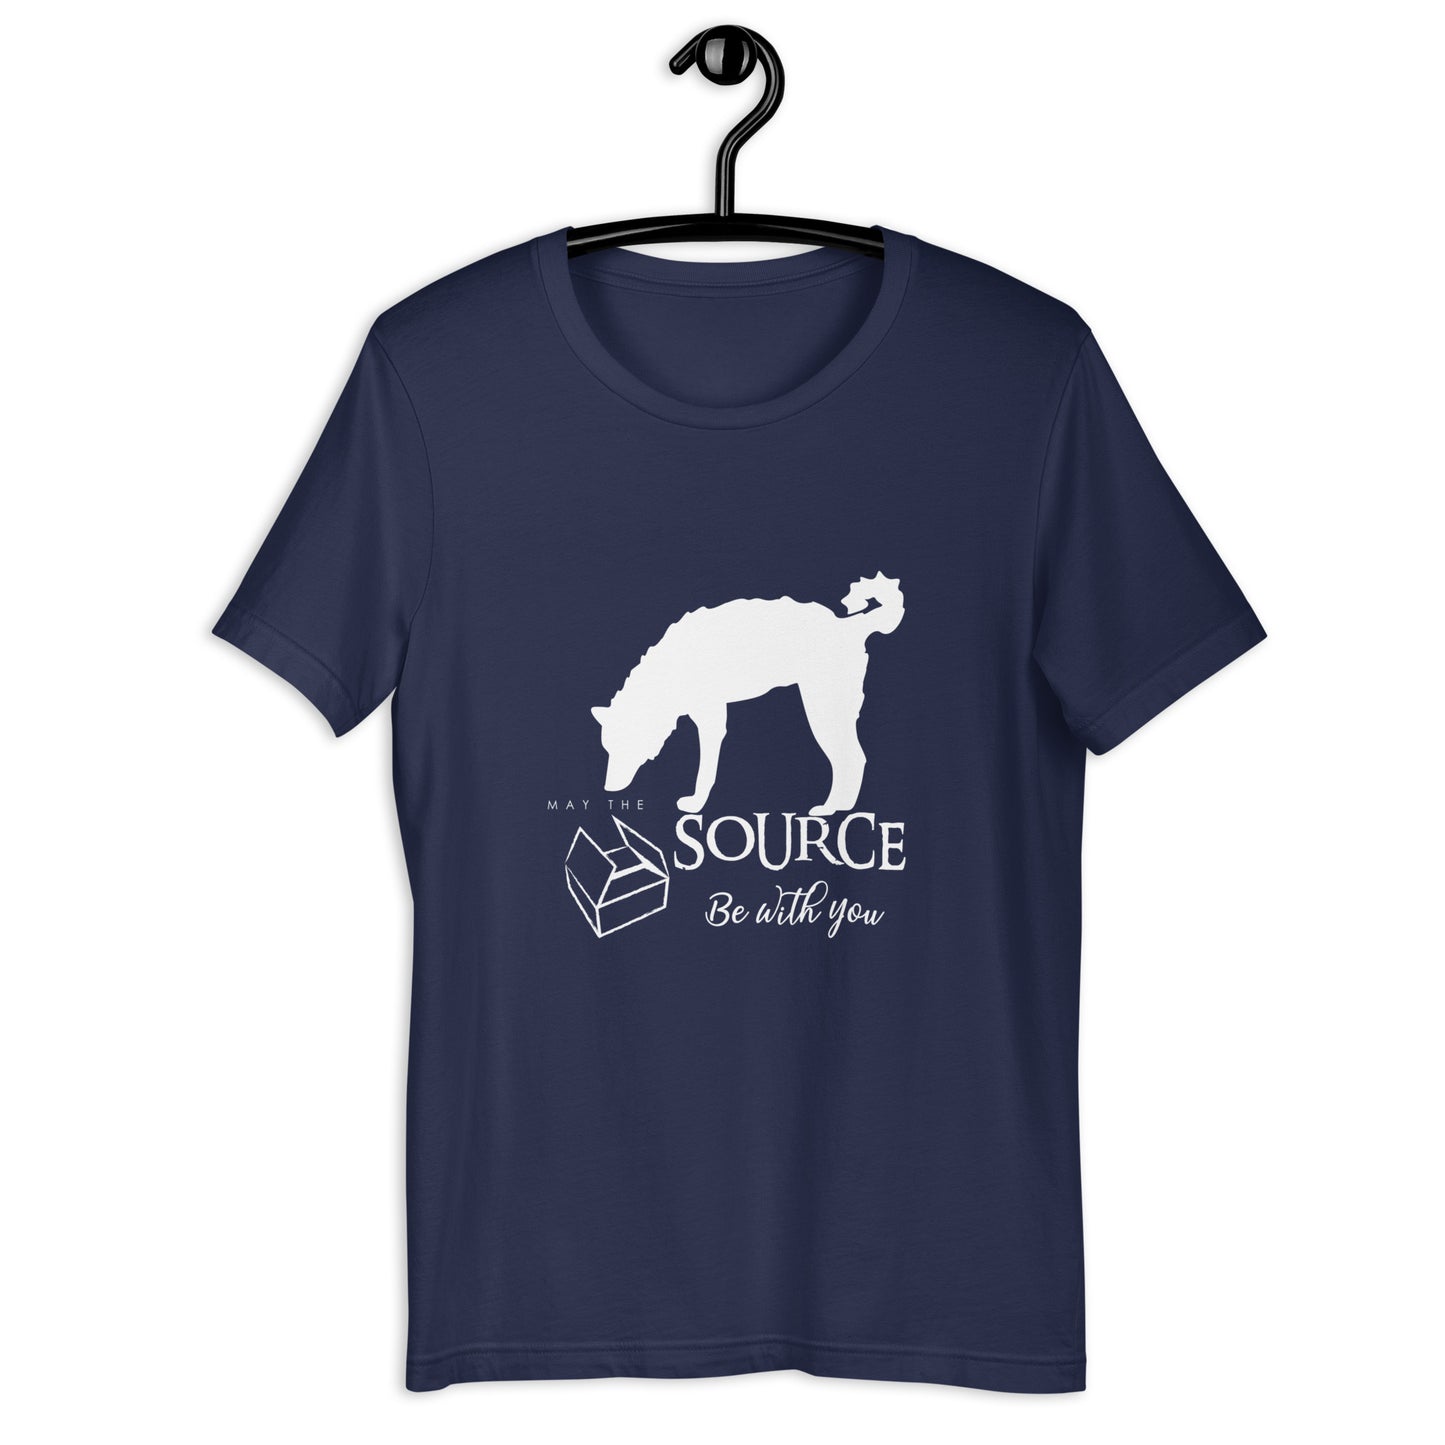 MAY THE SOURCE BE WITH YOU - MUDI Unisex t-shirt